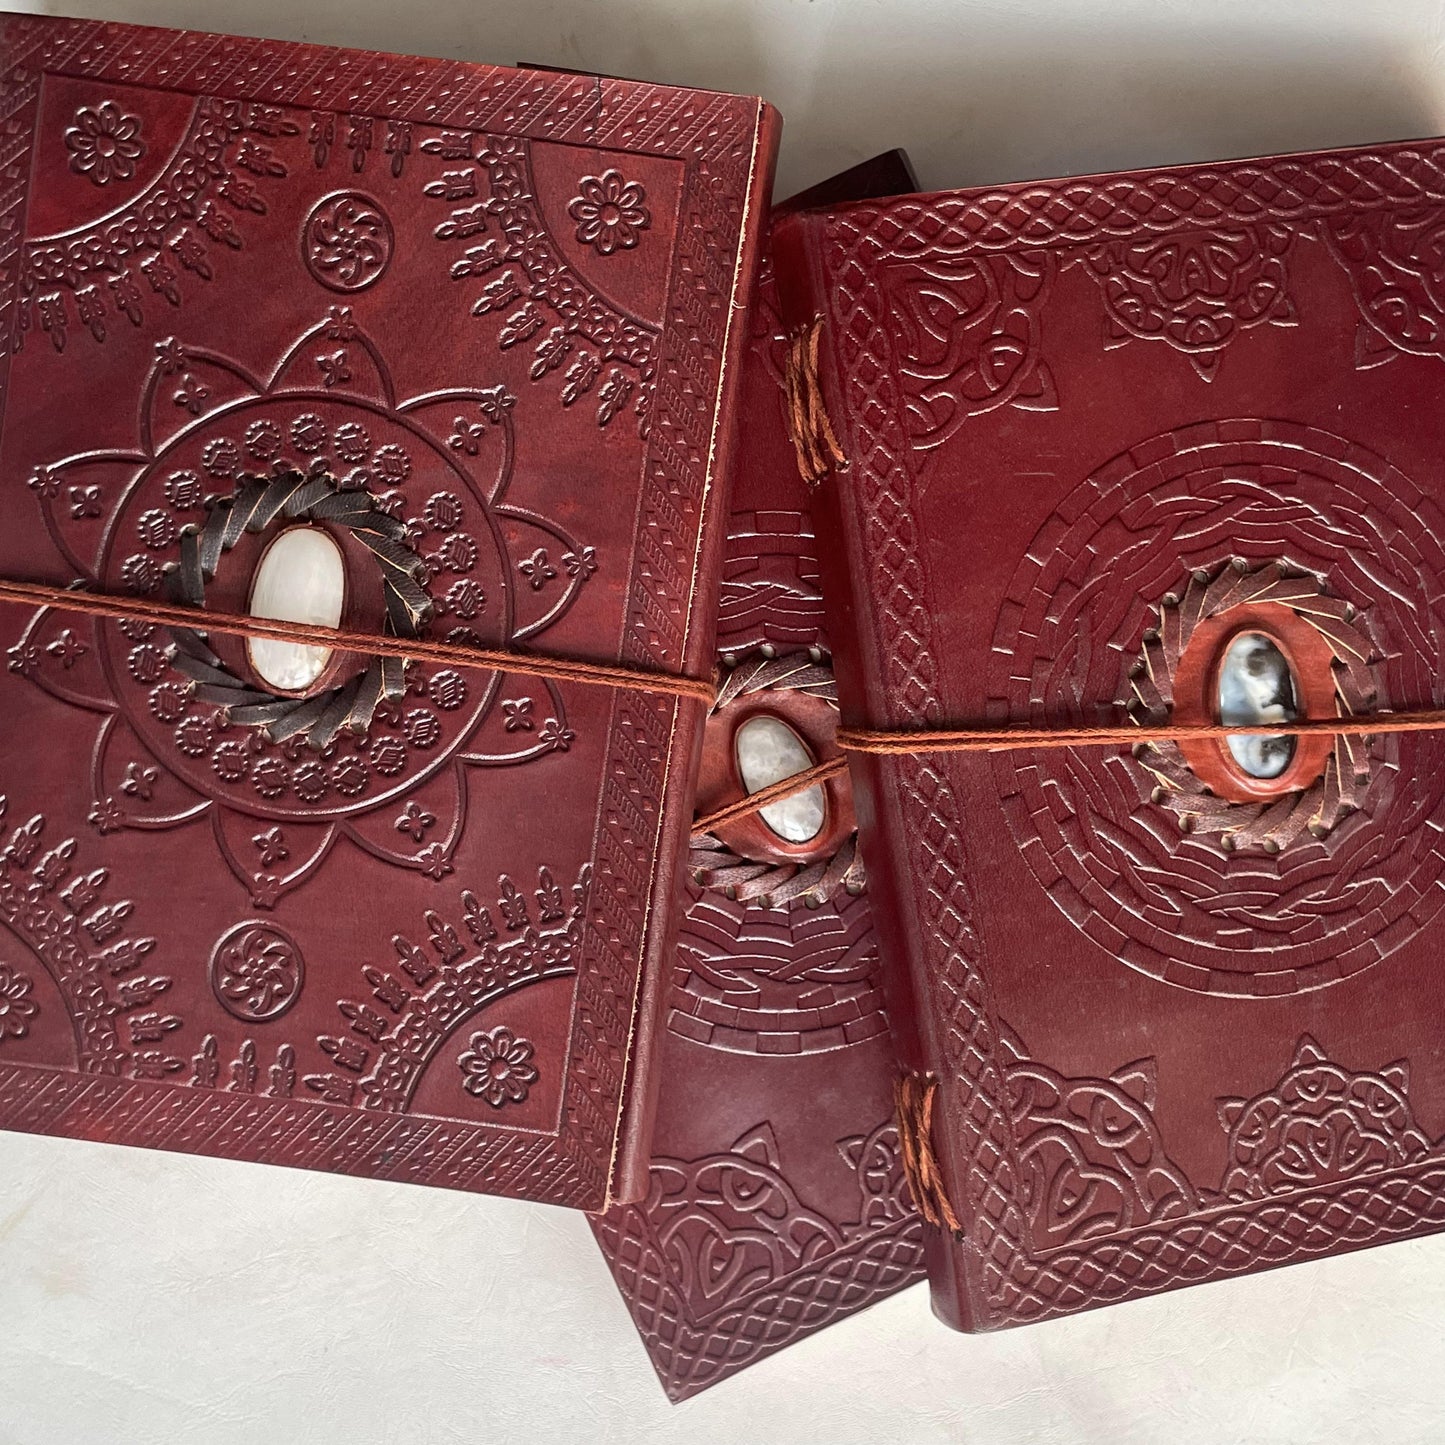 Embellished Leather Diary in a Compact 7x10 Inch Size" With Natural Gemstone